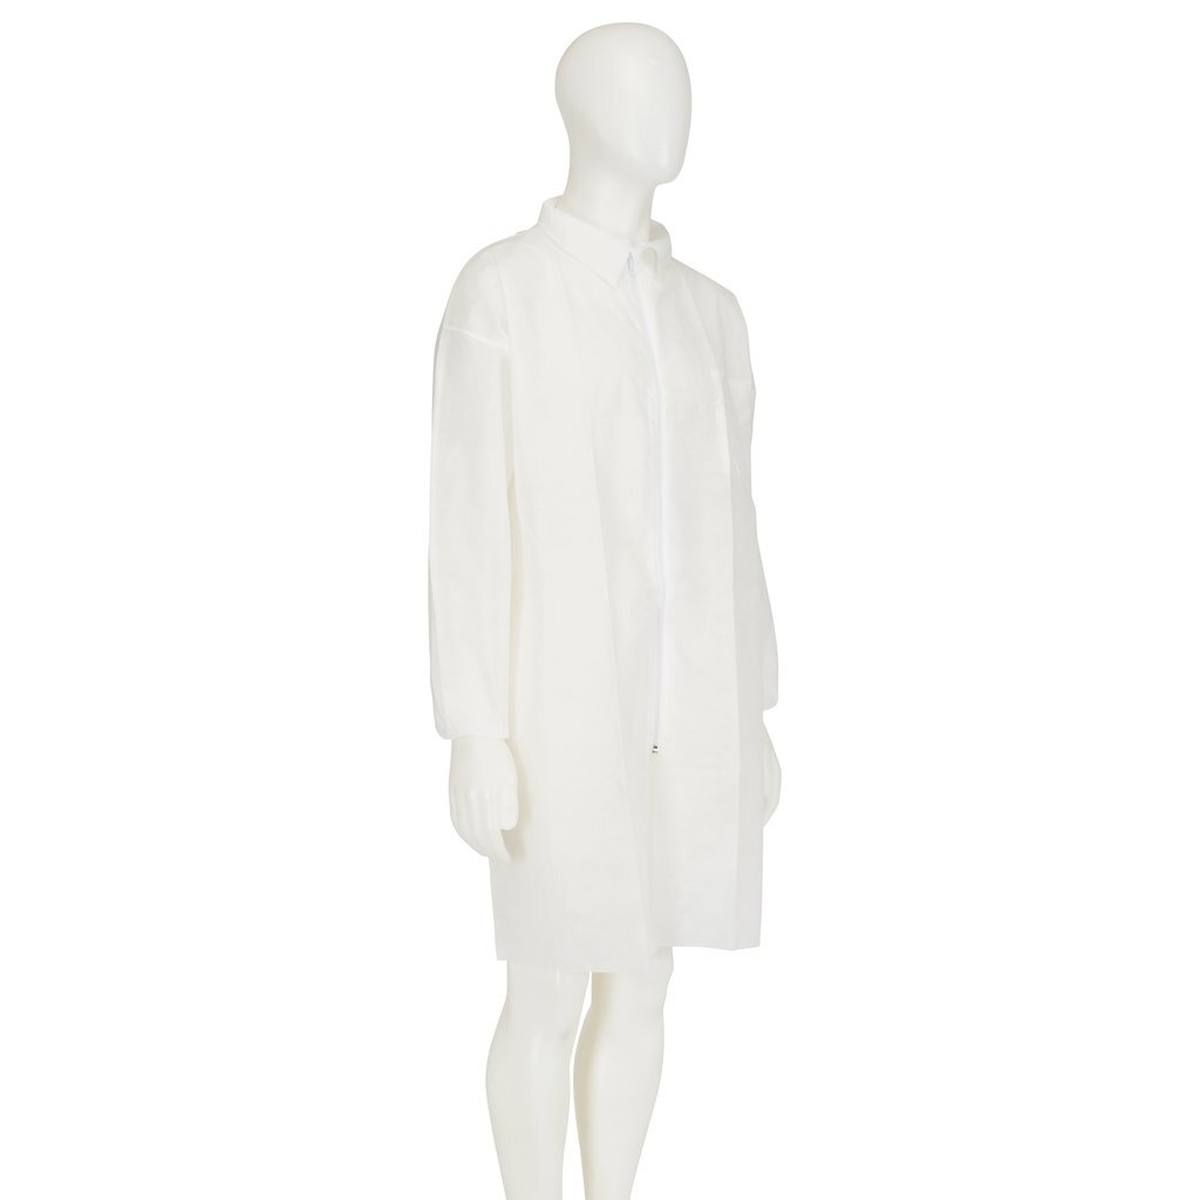 3M 4400 Coat, white, size XL, material 100% polypropylene, breathable, very light, with zip